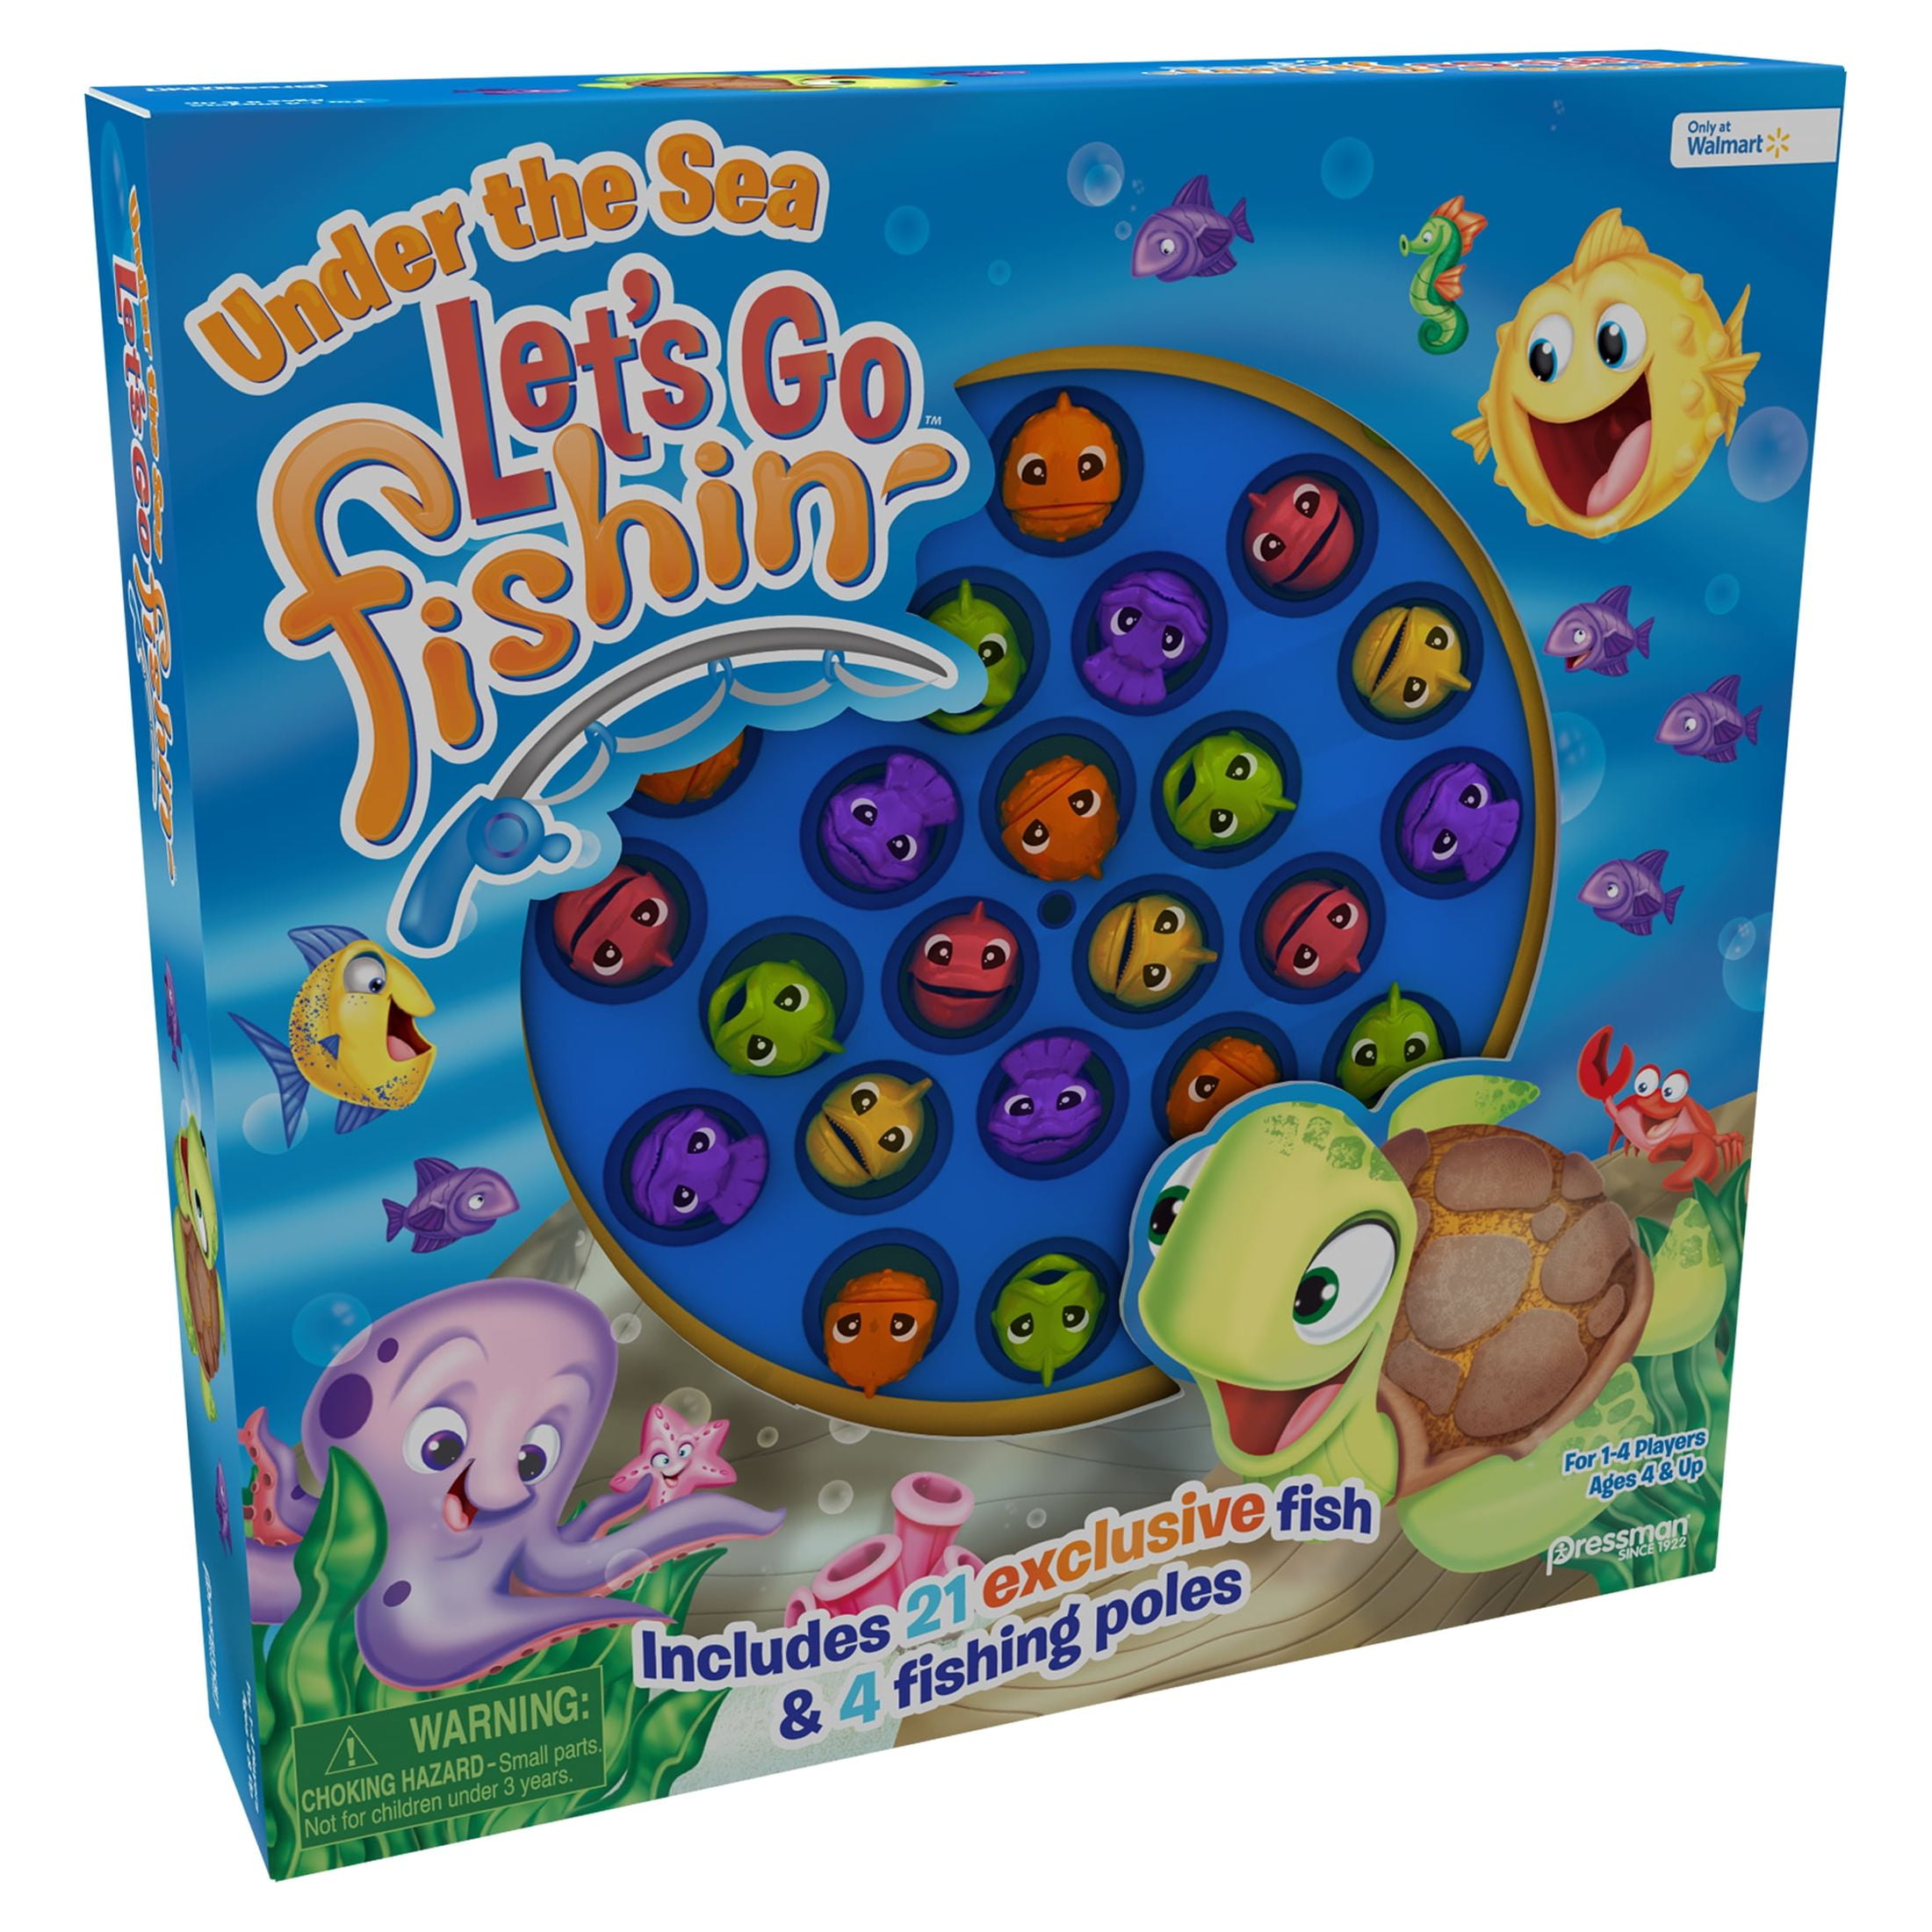 Shop Lets Go Fishing Toy online